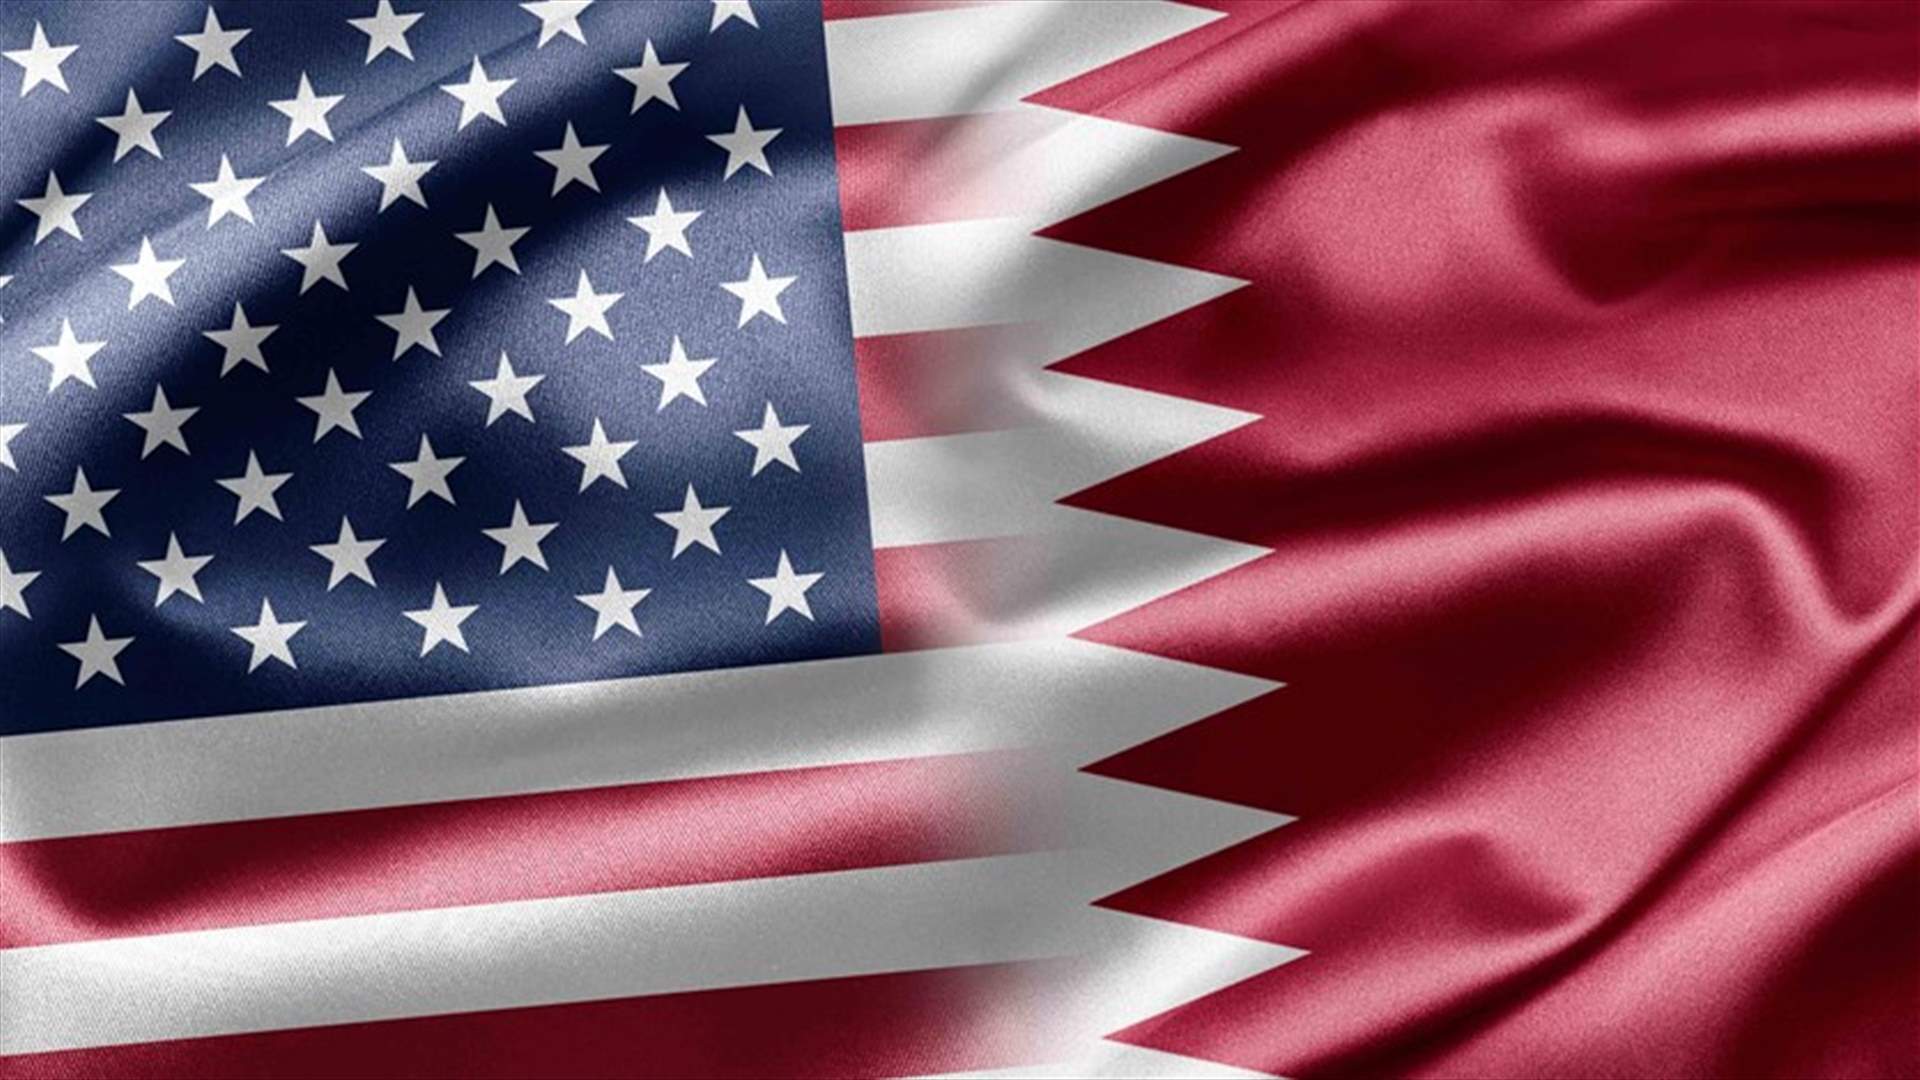 US to deploy officials in Qatar in counter-terrorism accord - sources